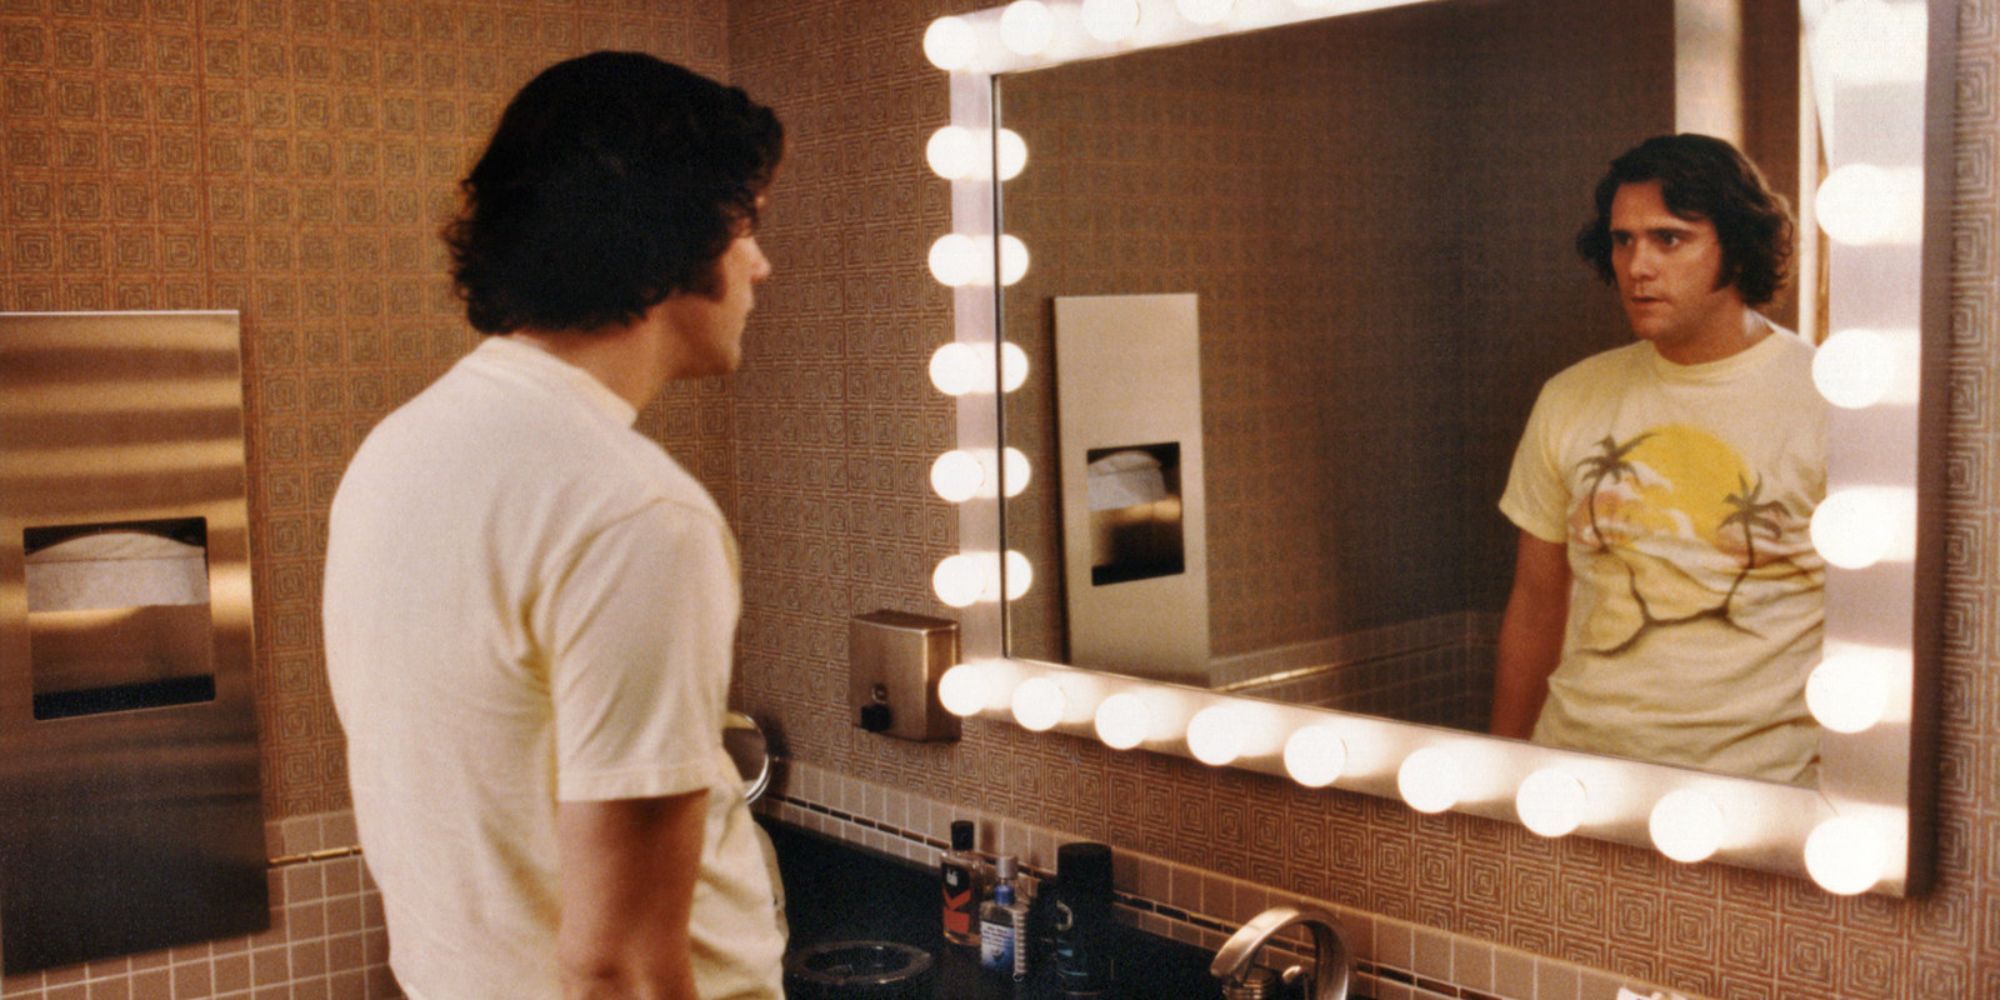 Jim Carey as Andy Kauffman, starring at his reflection in the mirror